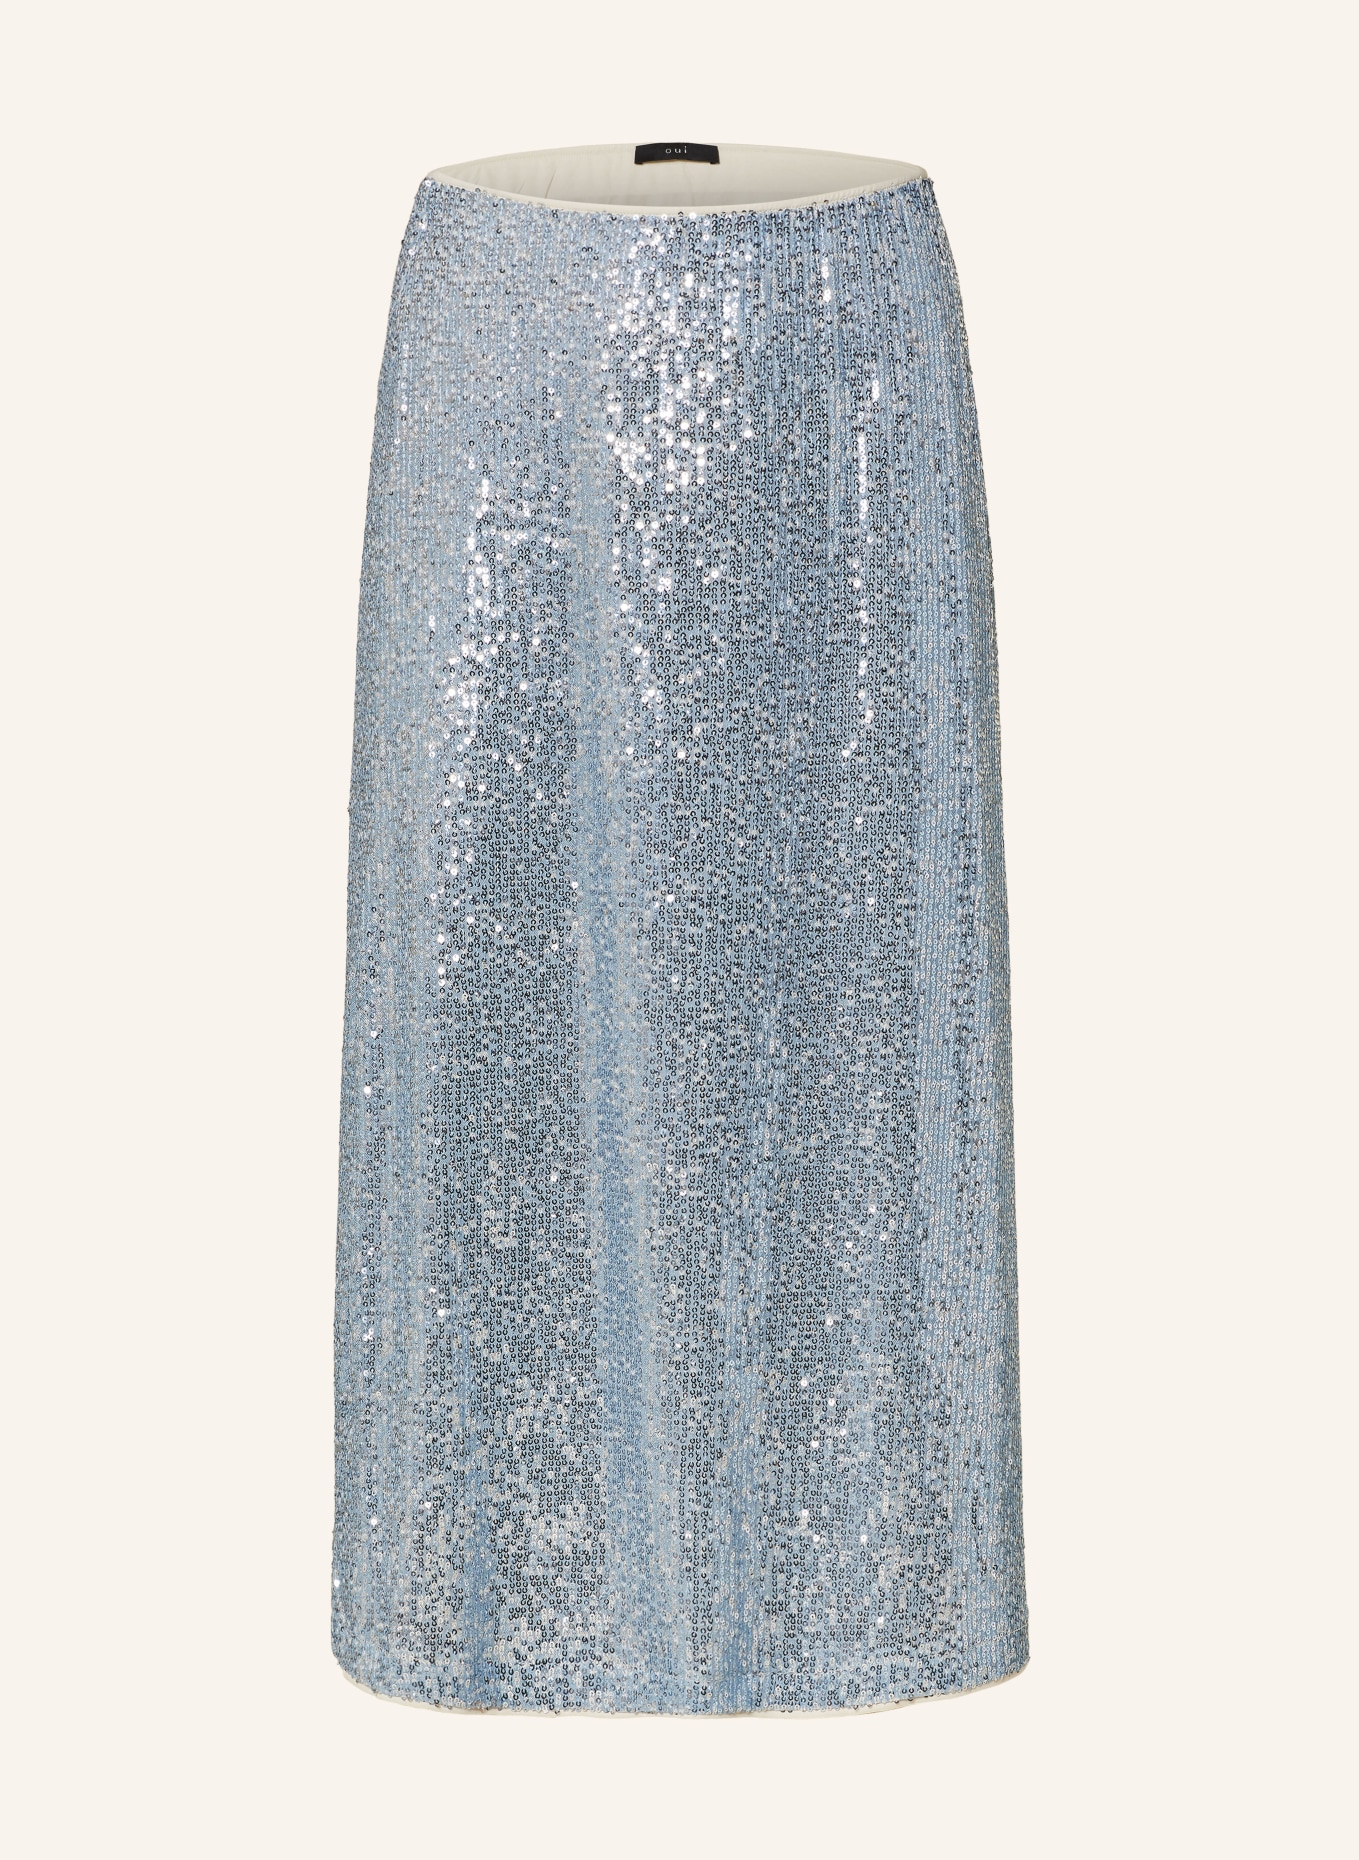 oui Skirt with sequins, Color: LIGHT BLUE (Image 1)